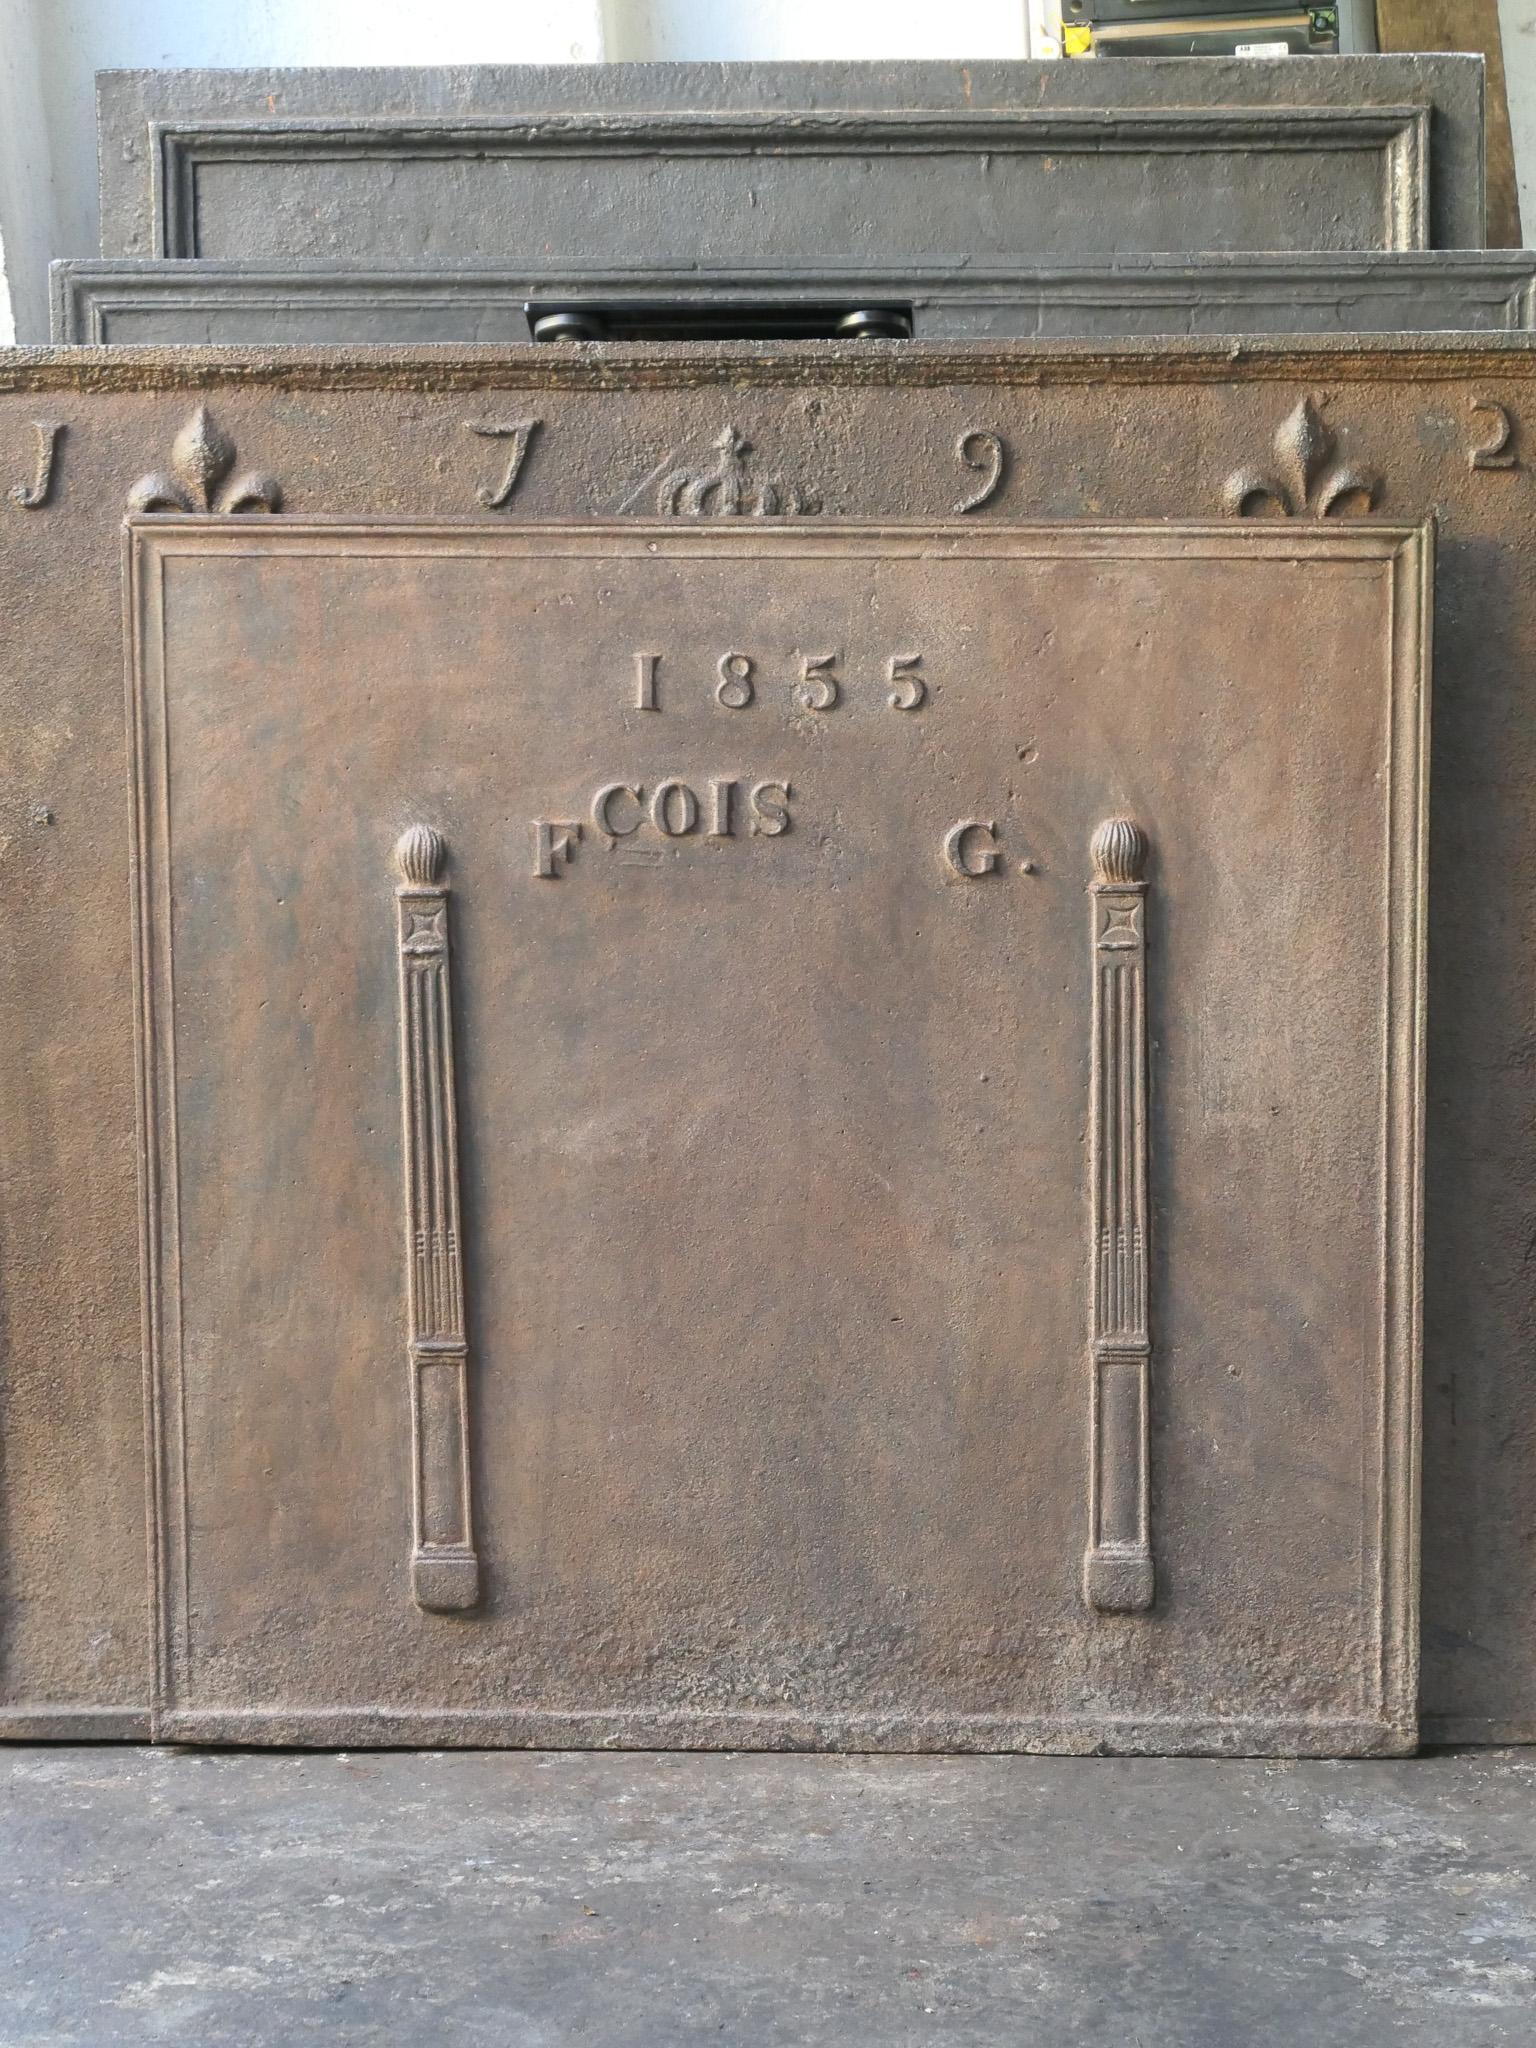 19th century French Neoclassical fireback with two pillars of freedom. The pillars symbolize the value liberty, one of the three values of the French revolution. The date of production, 1855, is also cast in the fireback.

The fireback is made of